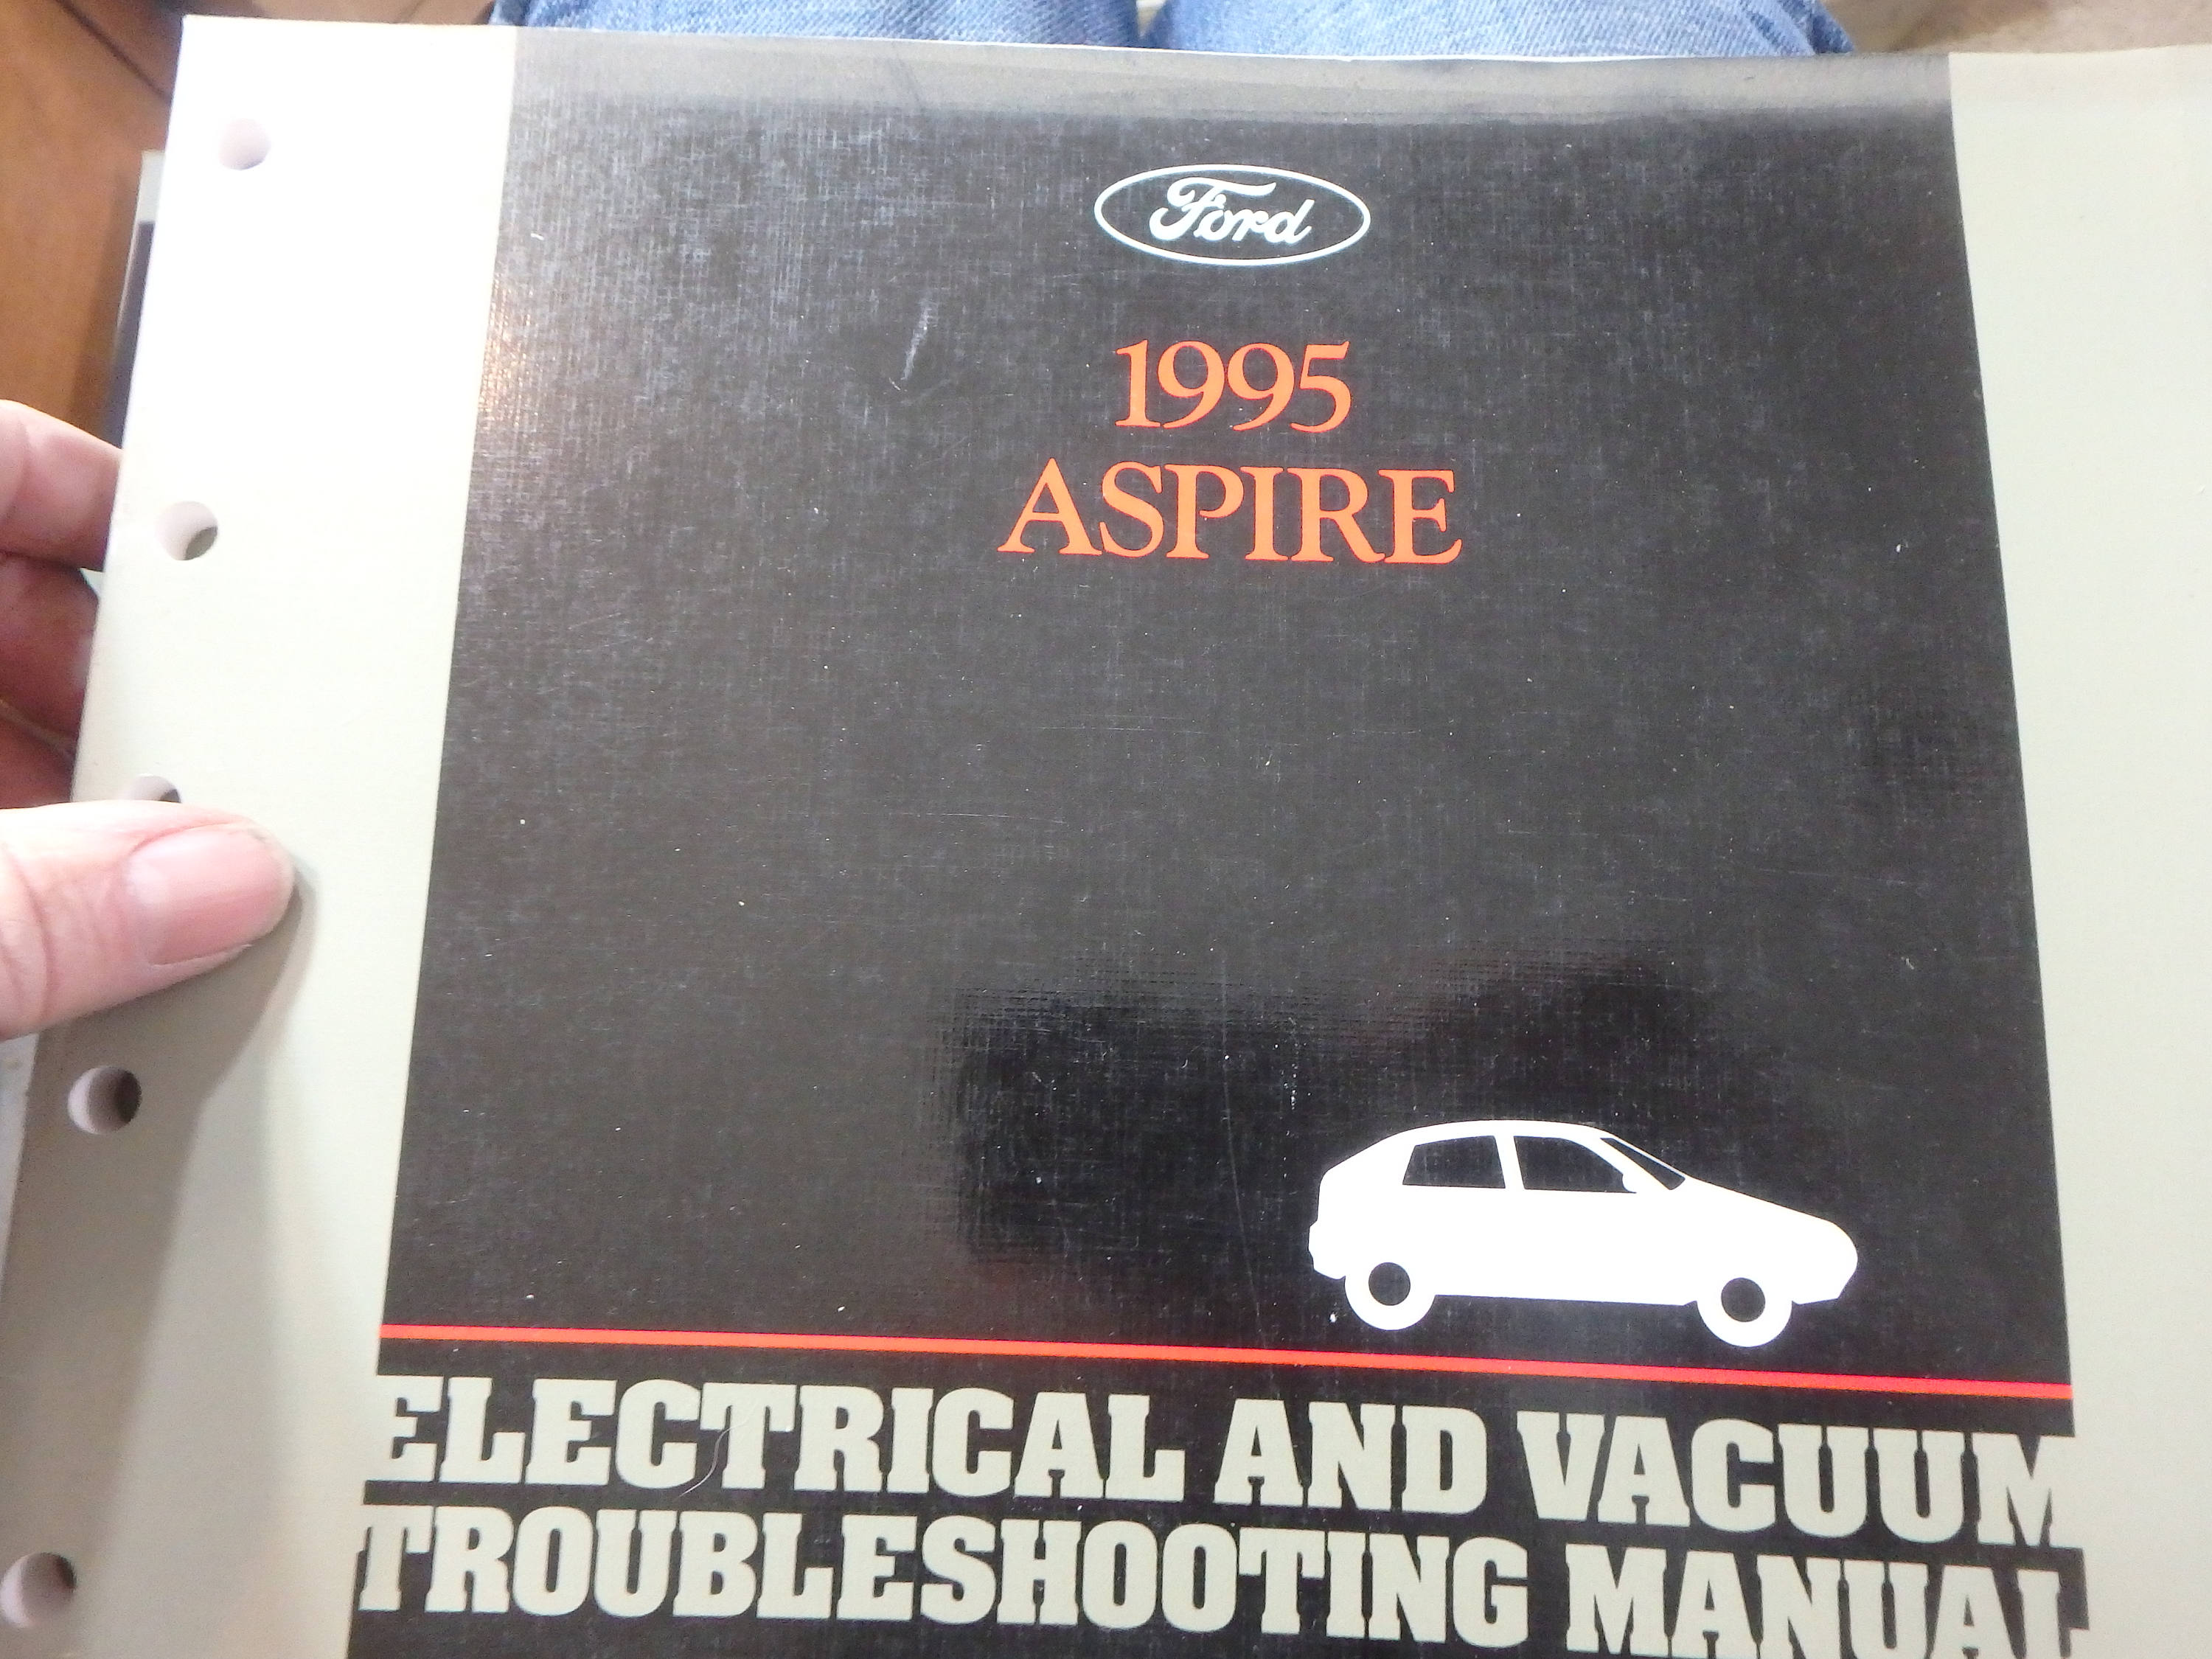 1995 Ford Aspire Electrical & Vacuum Troubleshooting Wiring Service Manual EVTM 